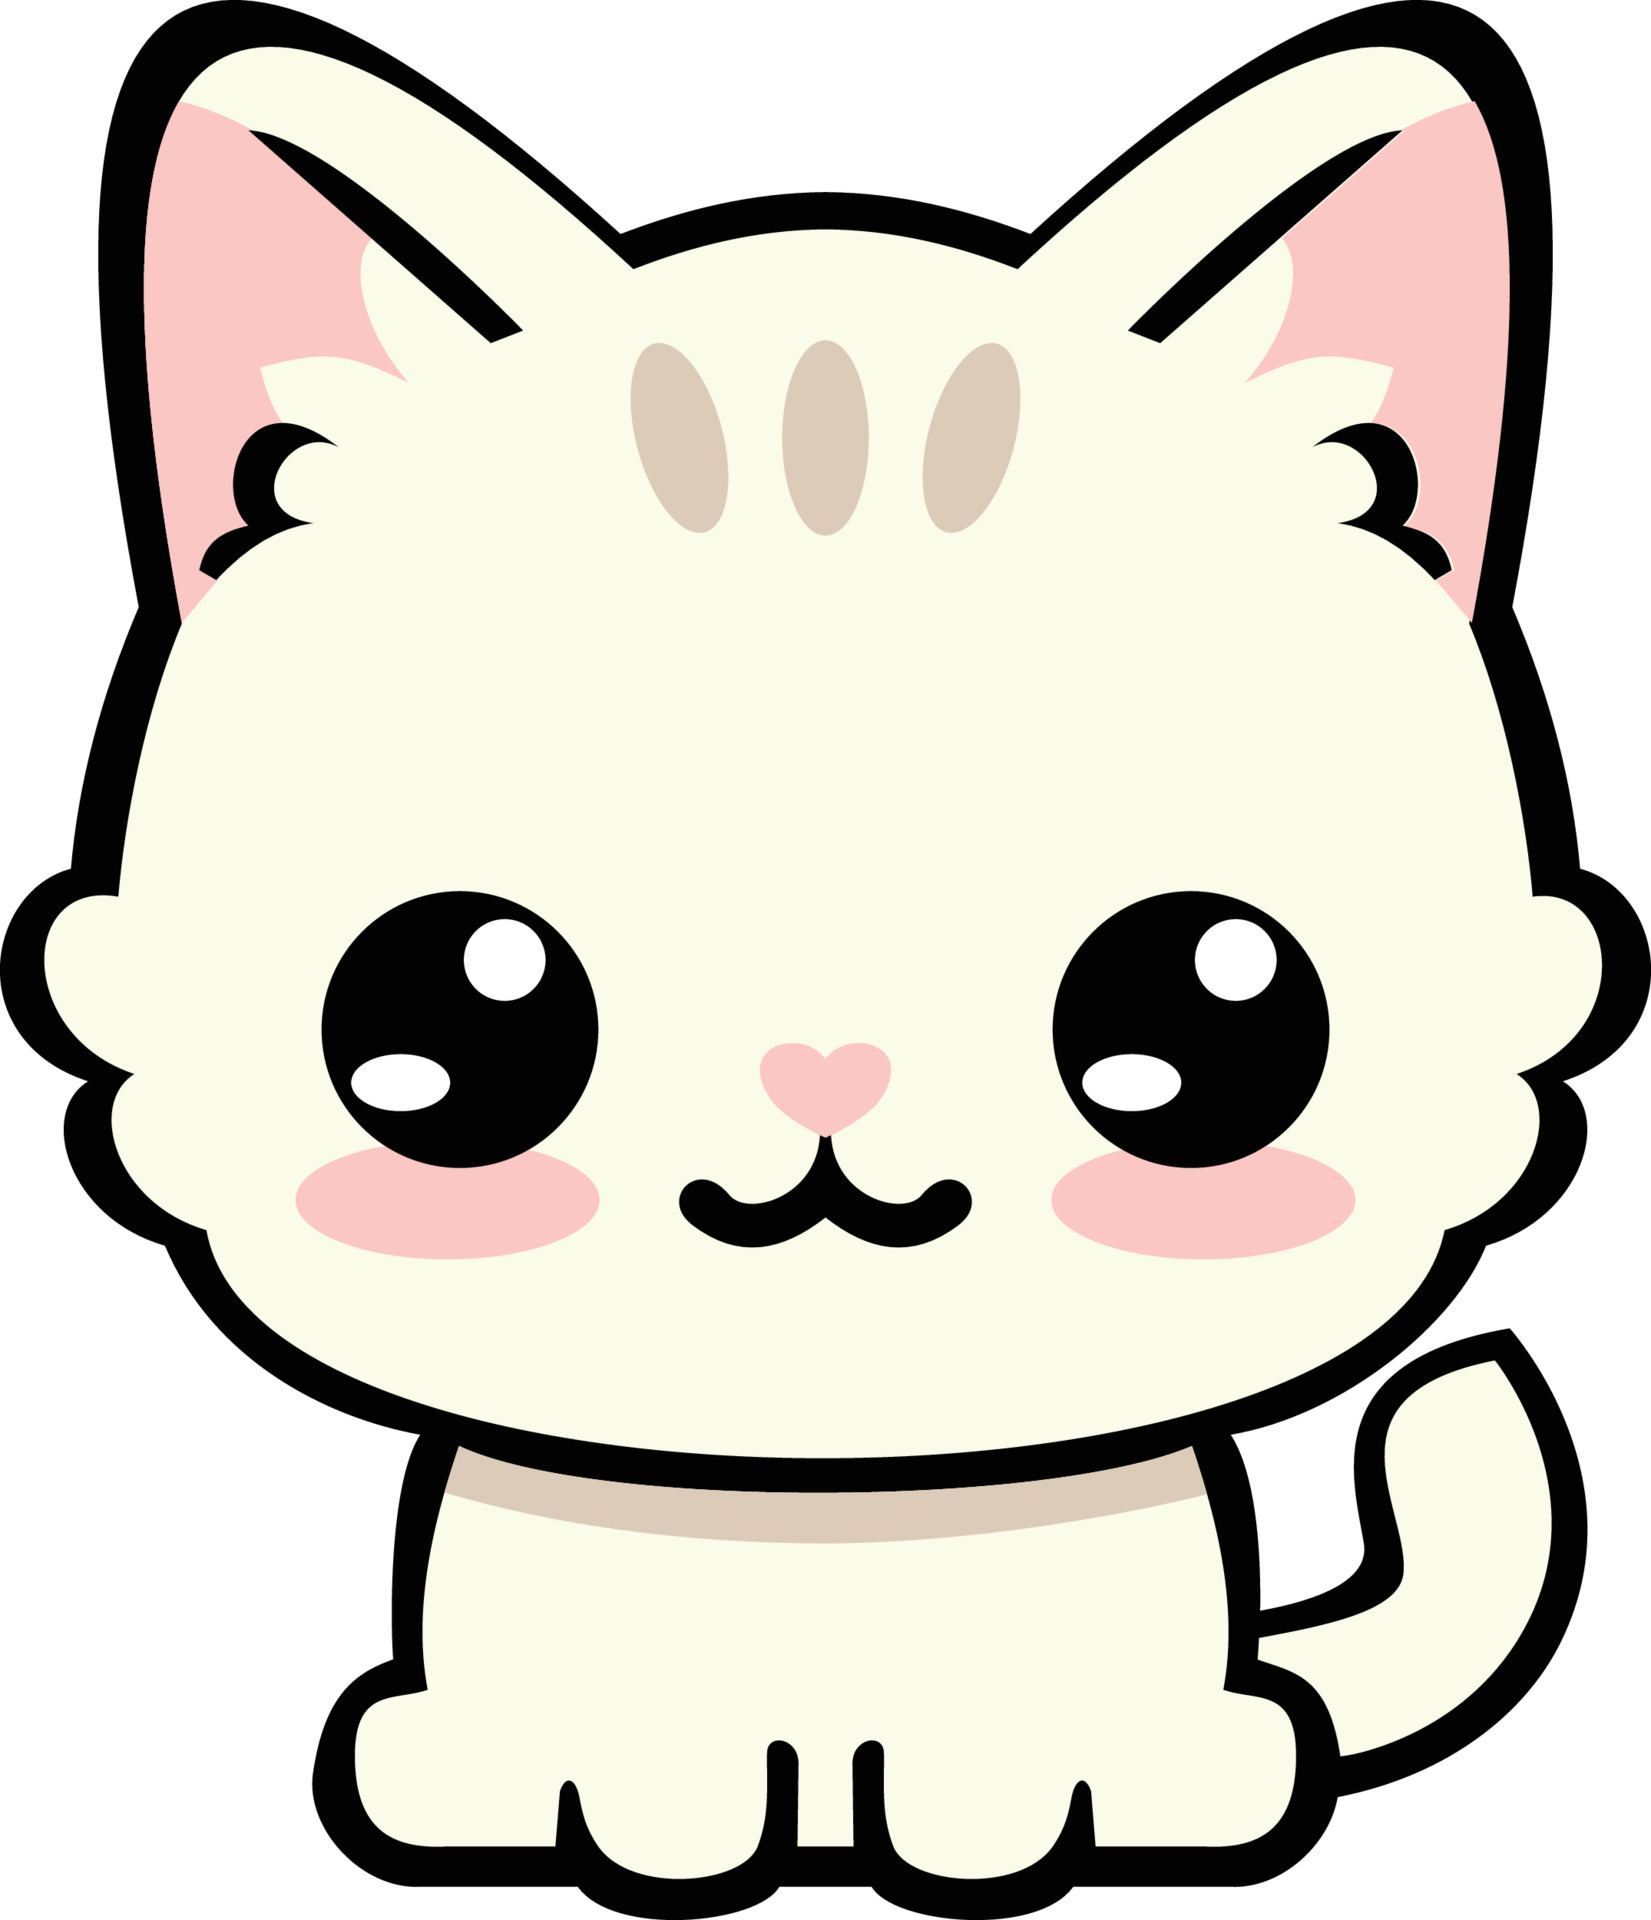 4900 Cute Anime Cat Stock Photos Pictures  RoyaltyFree Images  iStock